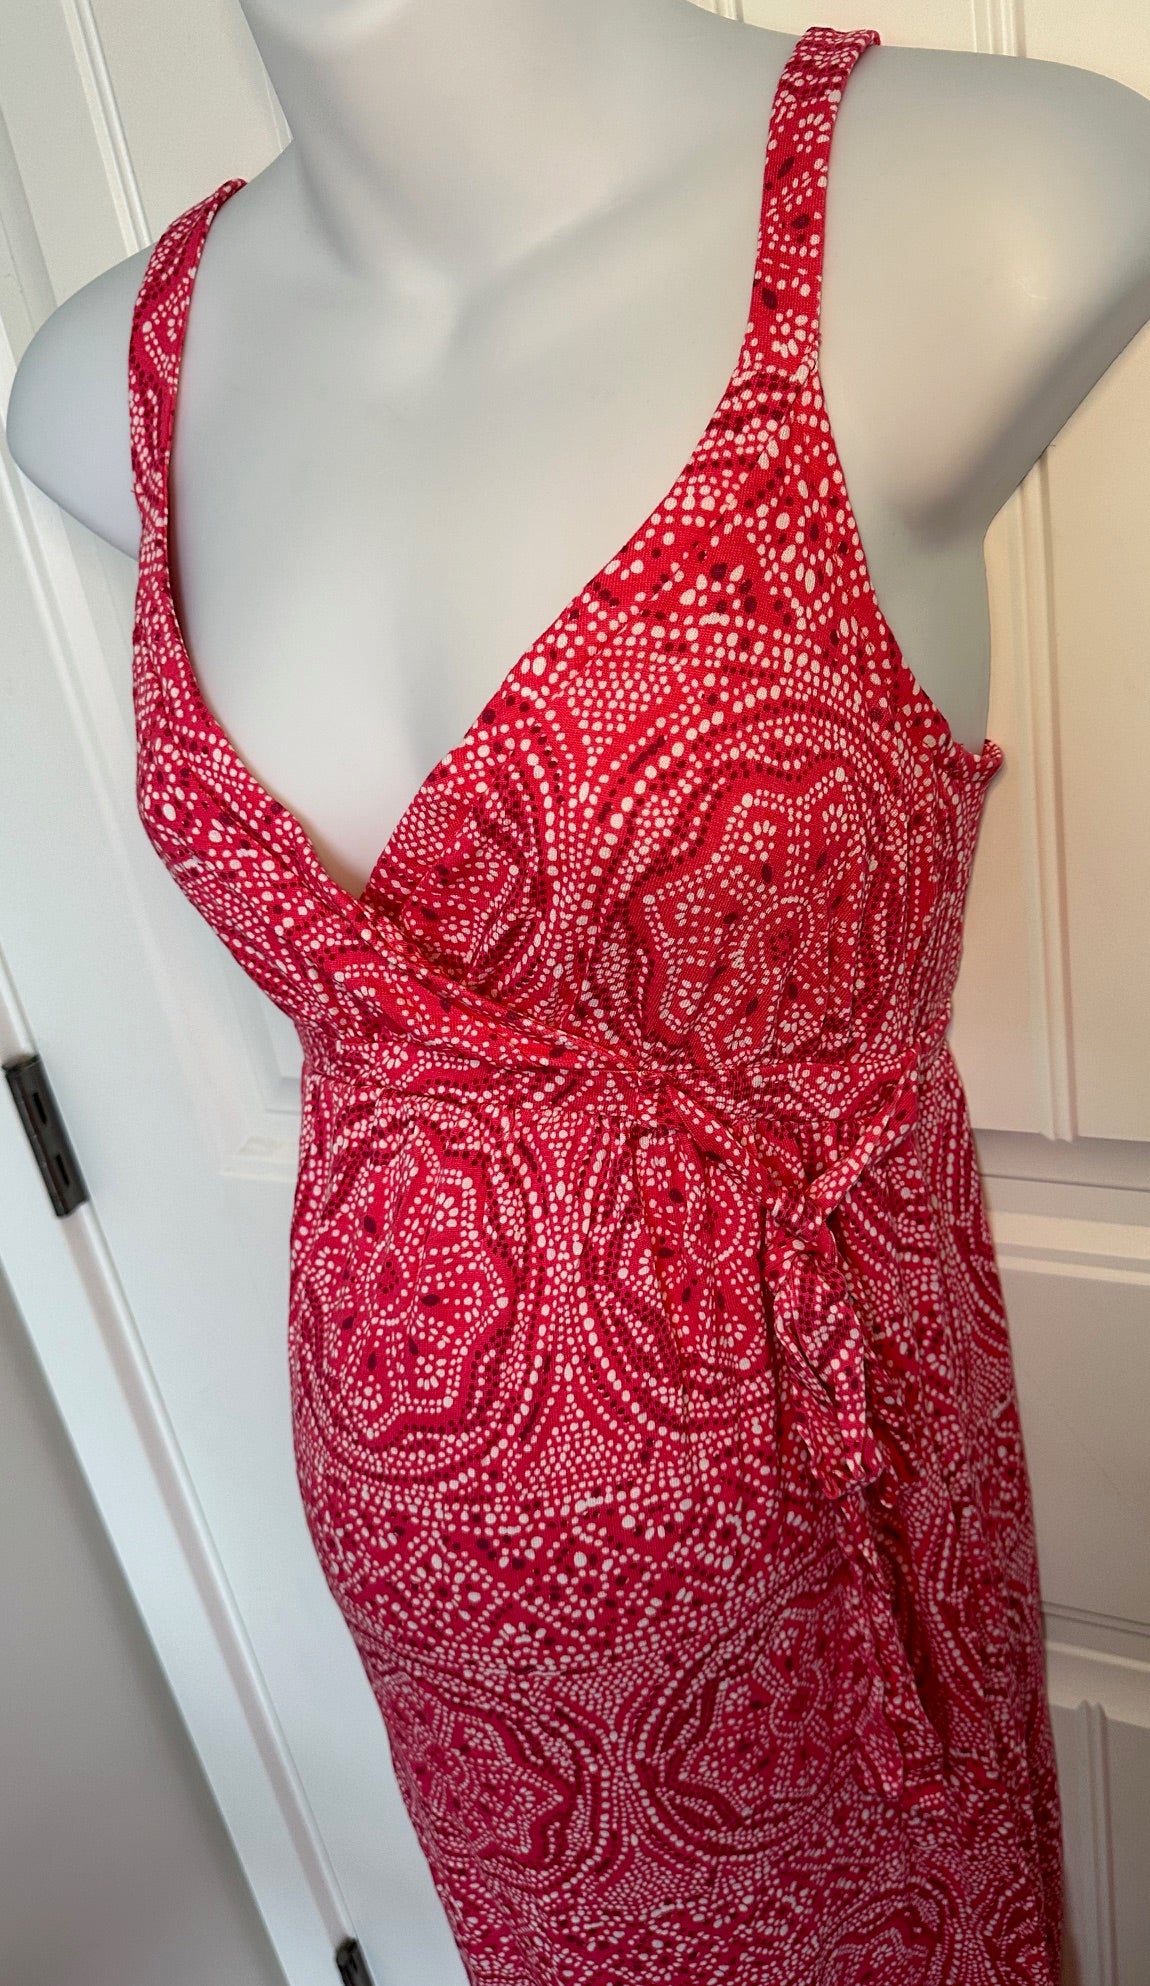 Old Navy, Pink Patterned Long Summer Maternity Dress - Size XS